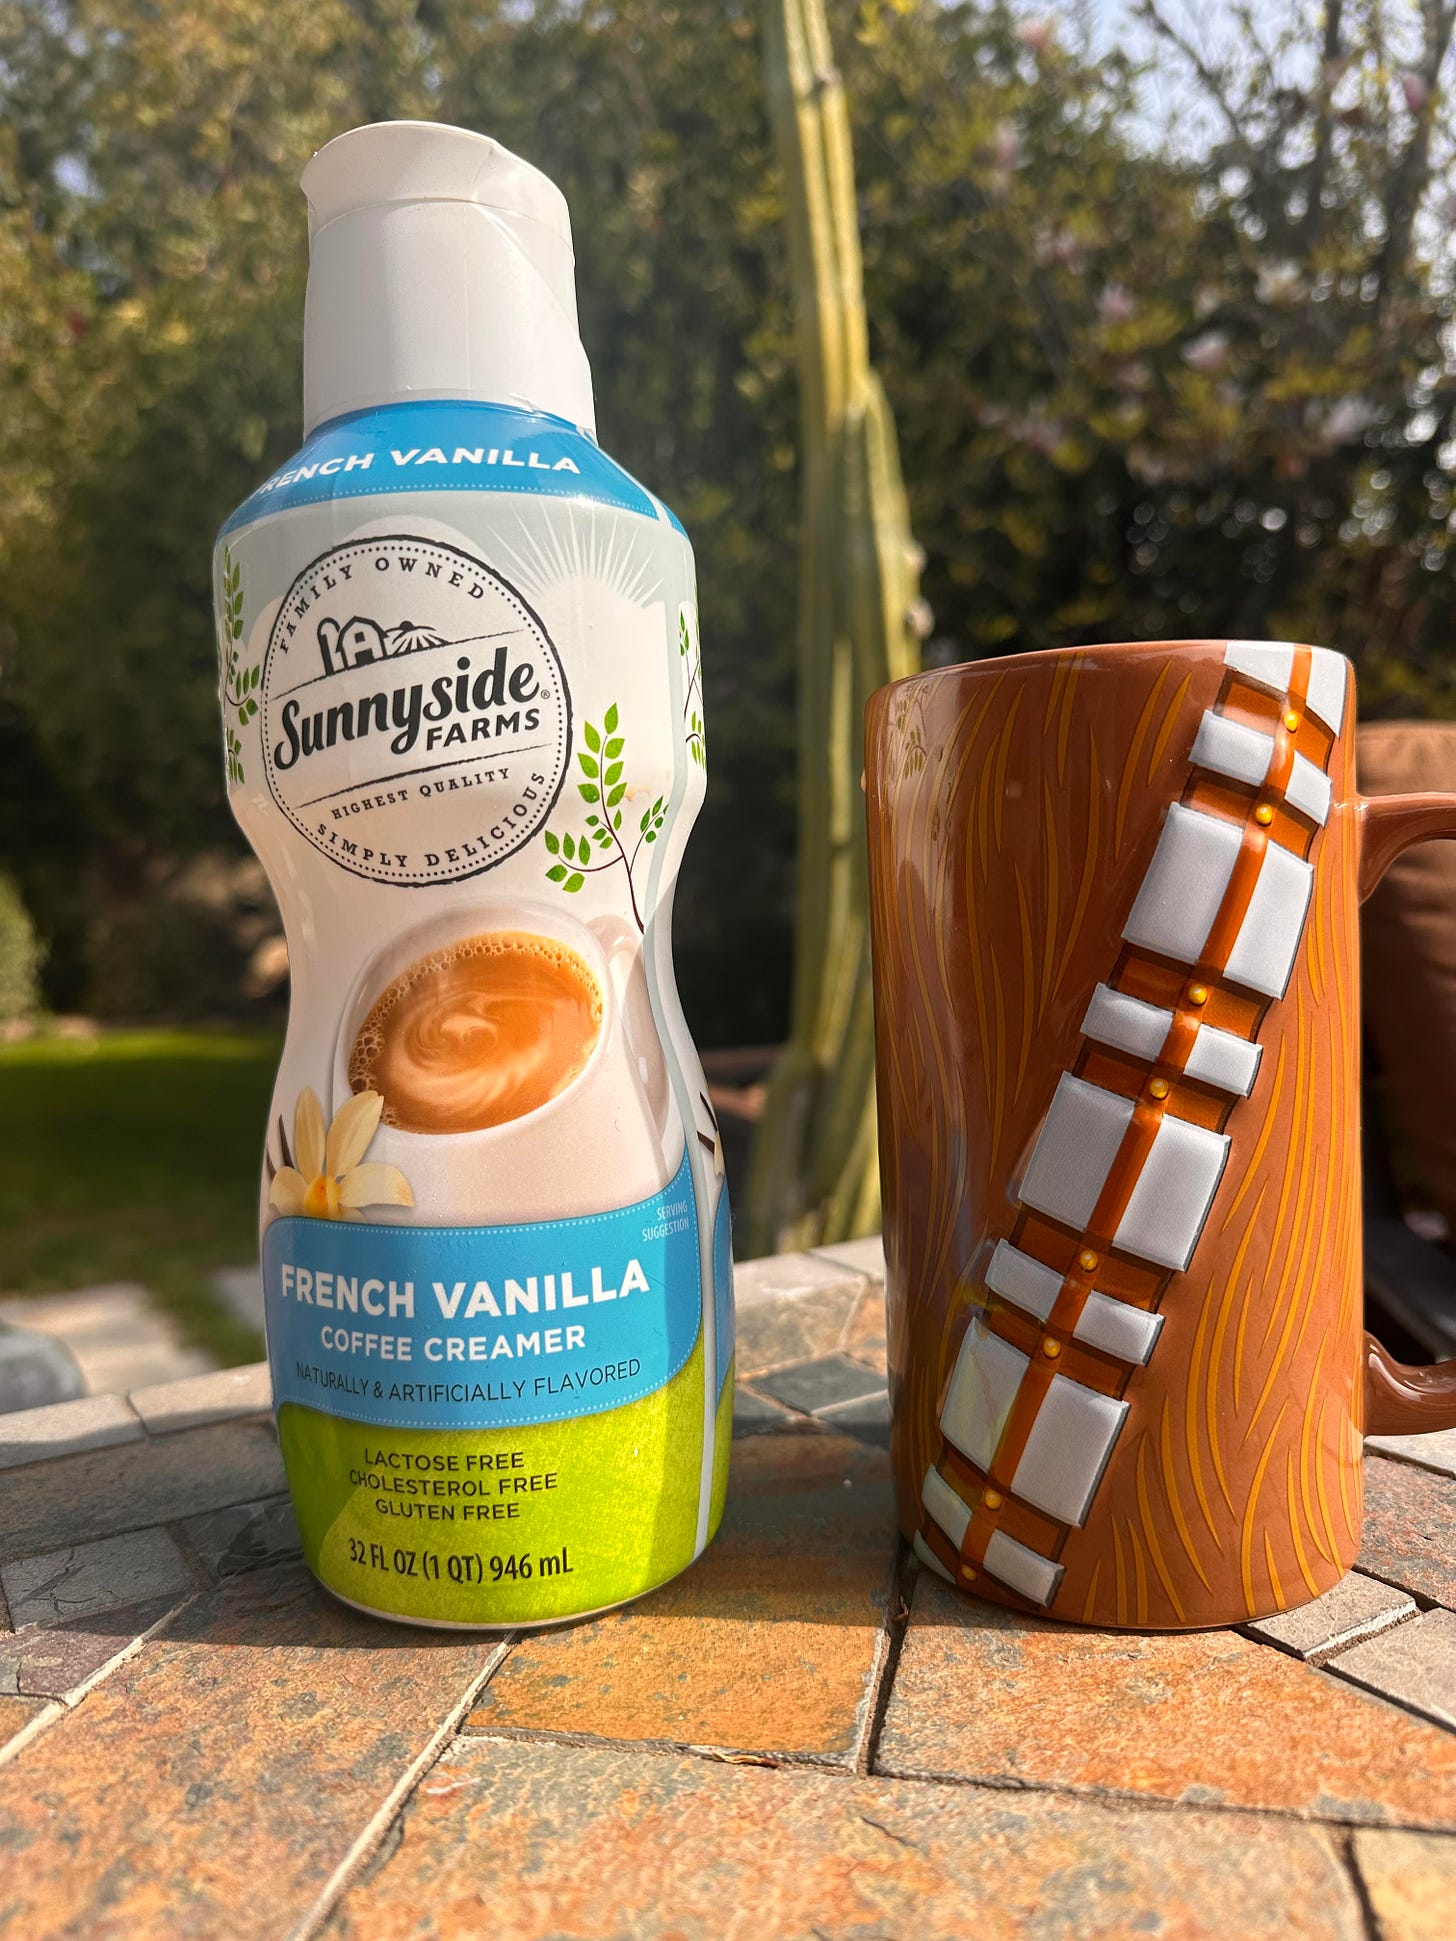 french vanilla coffee creamer next to a Chewbacca Wookiee coffee cup